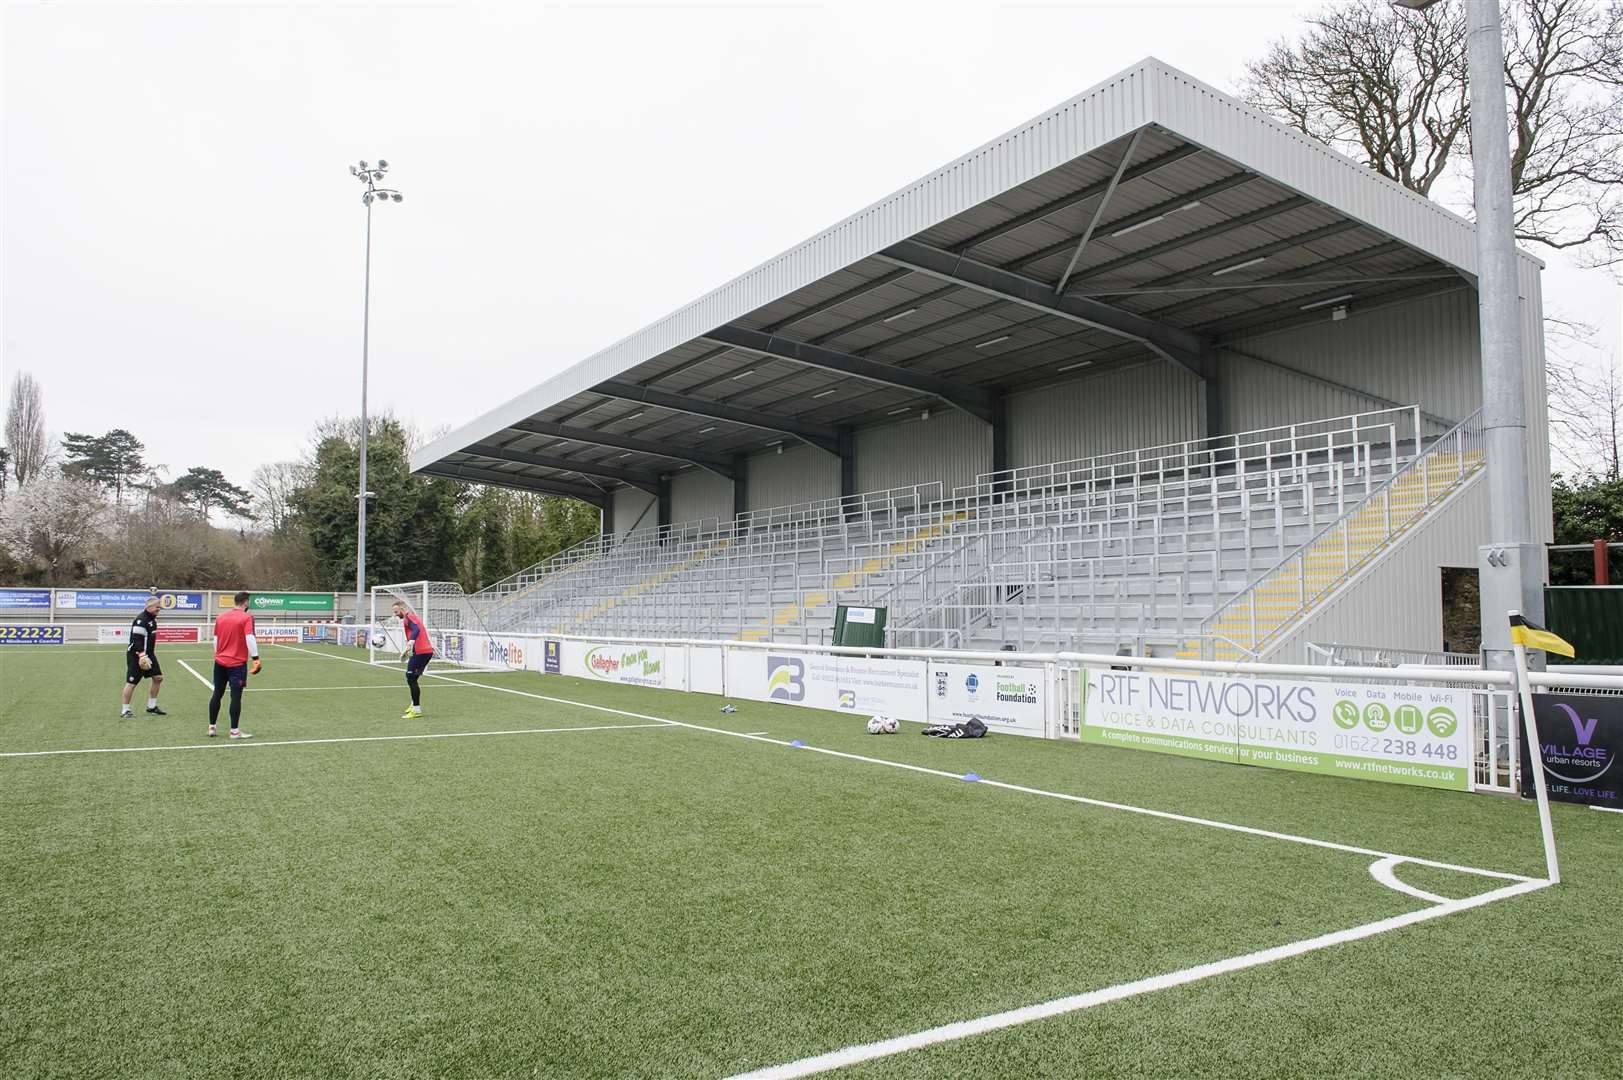 The Genco Stand opened in March 2017, built at a cost of £750,000, and providing terracing for almost 1,800 fans Picture: Andy Payton